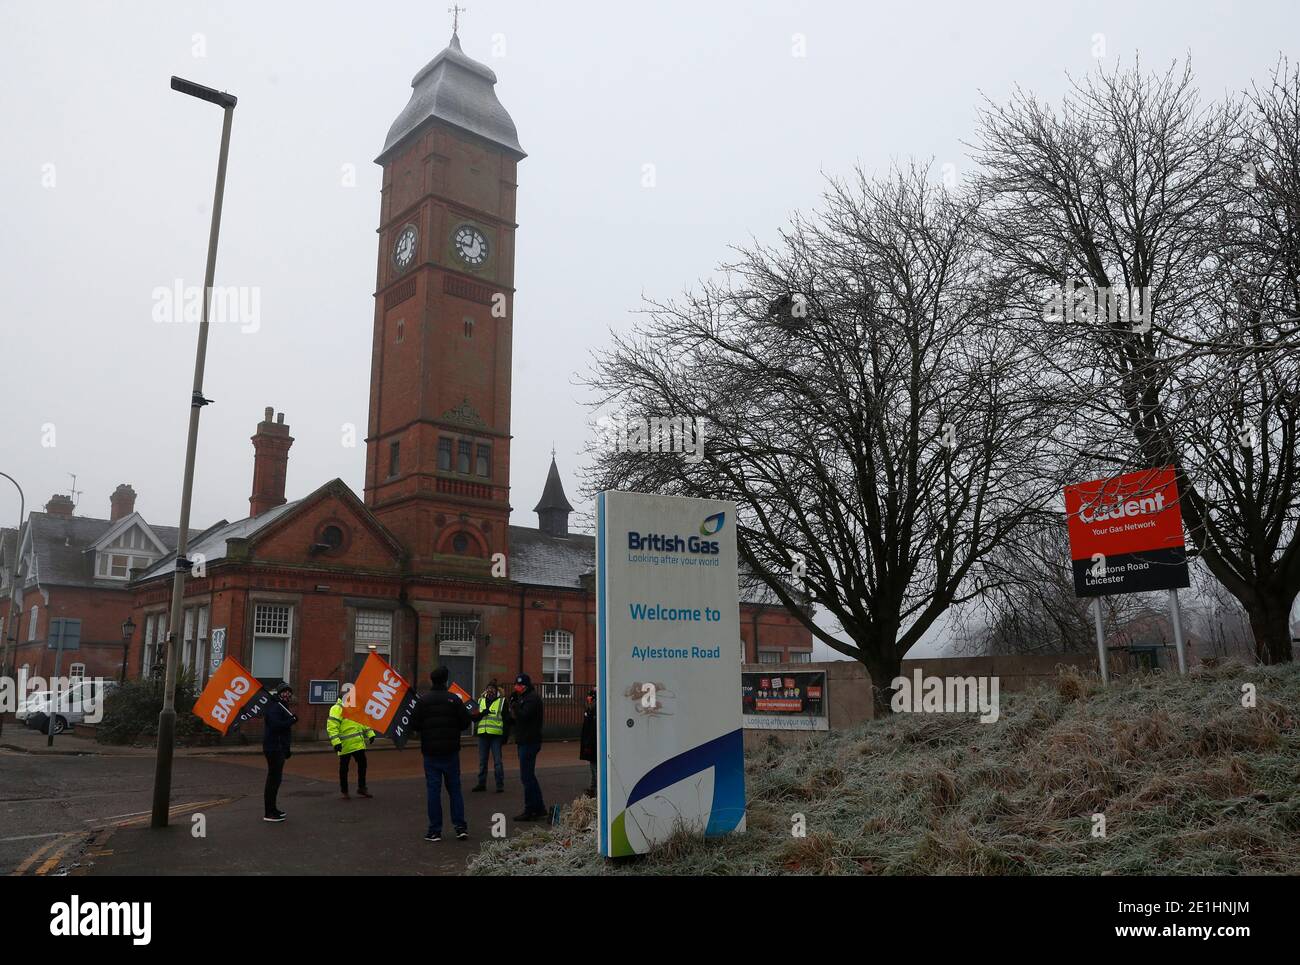 Leicester, Leicestershire, UK. 7th January 2021. A British Gas workers stand on a picket line at the entrance to the Leicester gas works and museum at the start of a five day strike over new contracts. Credit Darren Staples/Alamy Live News. Stock Photo